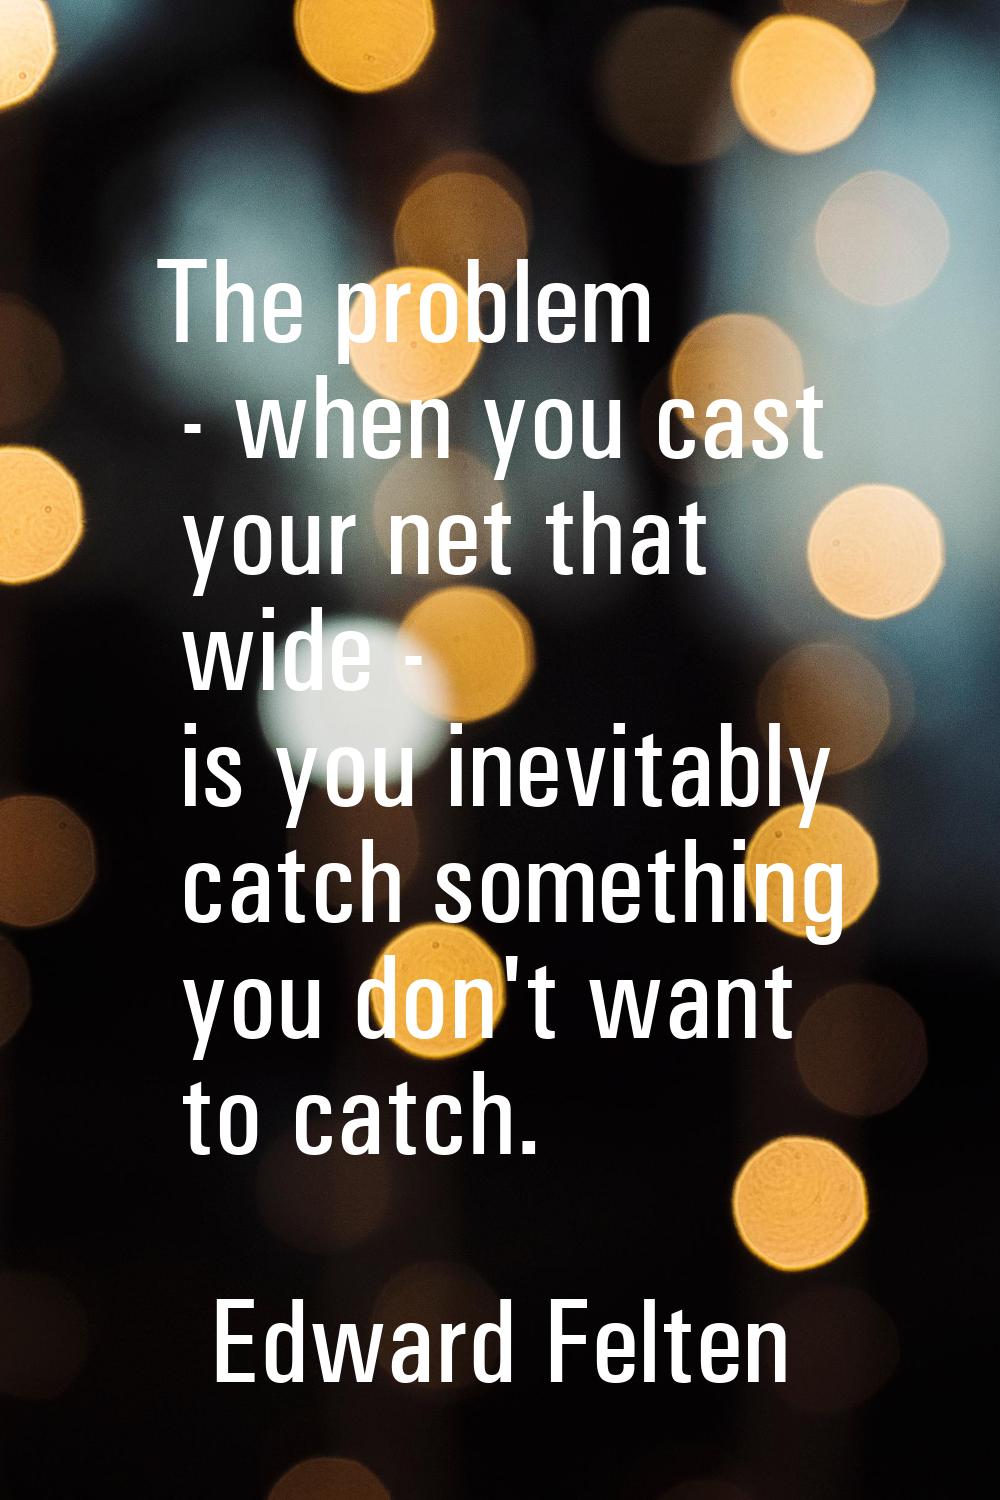 The problem - when you cast your net that wide - is you inevitably catch something you don't want t